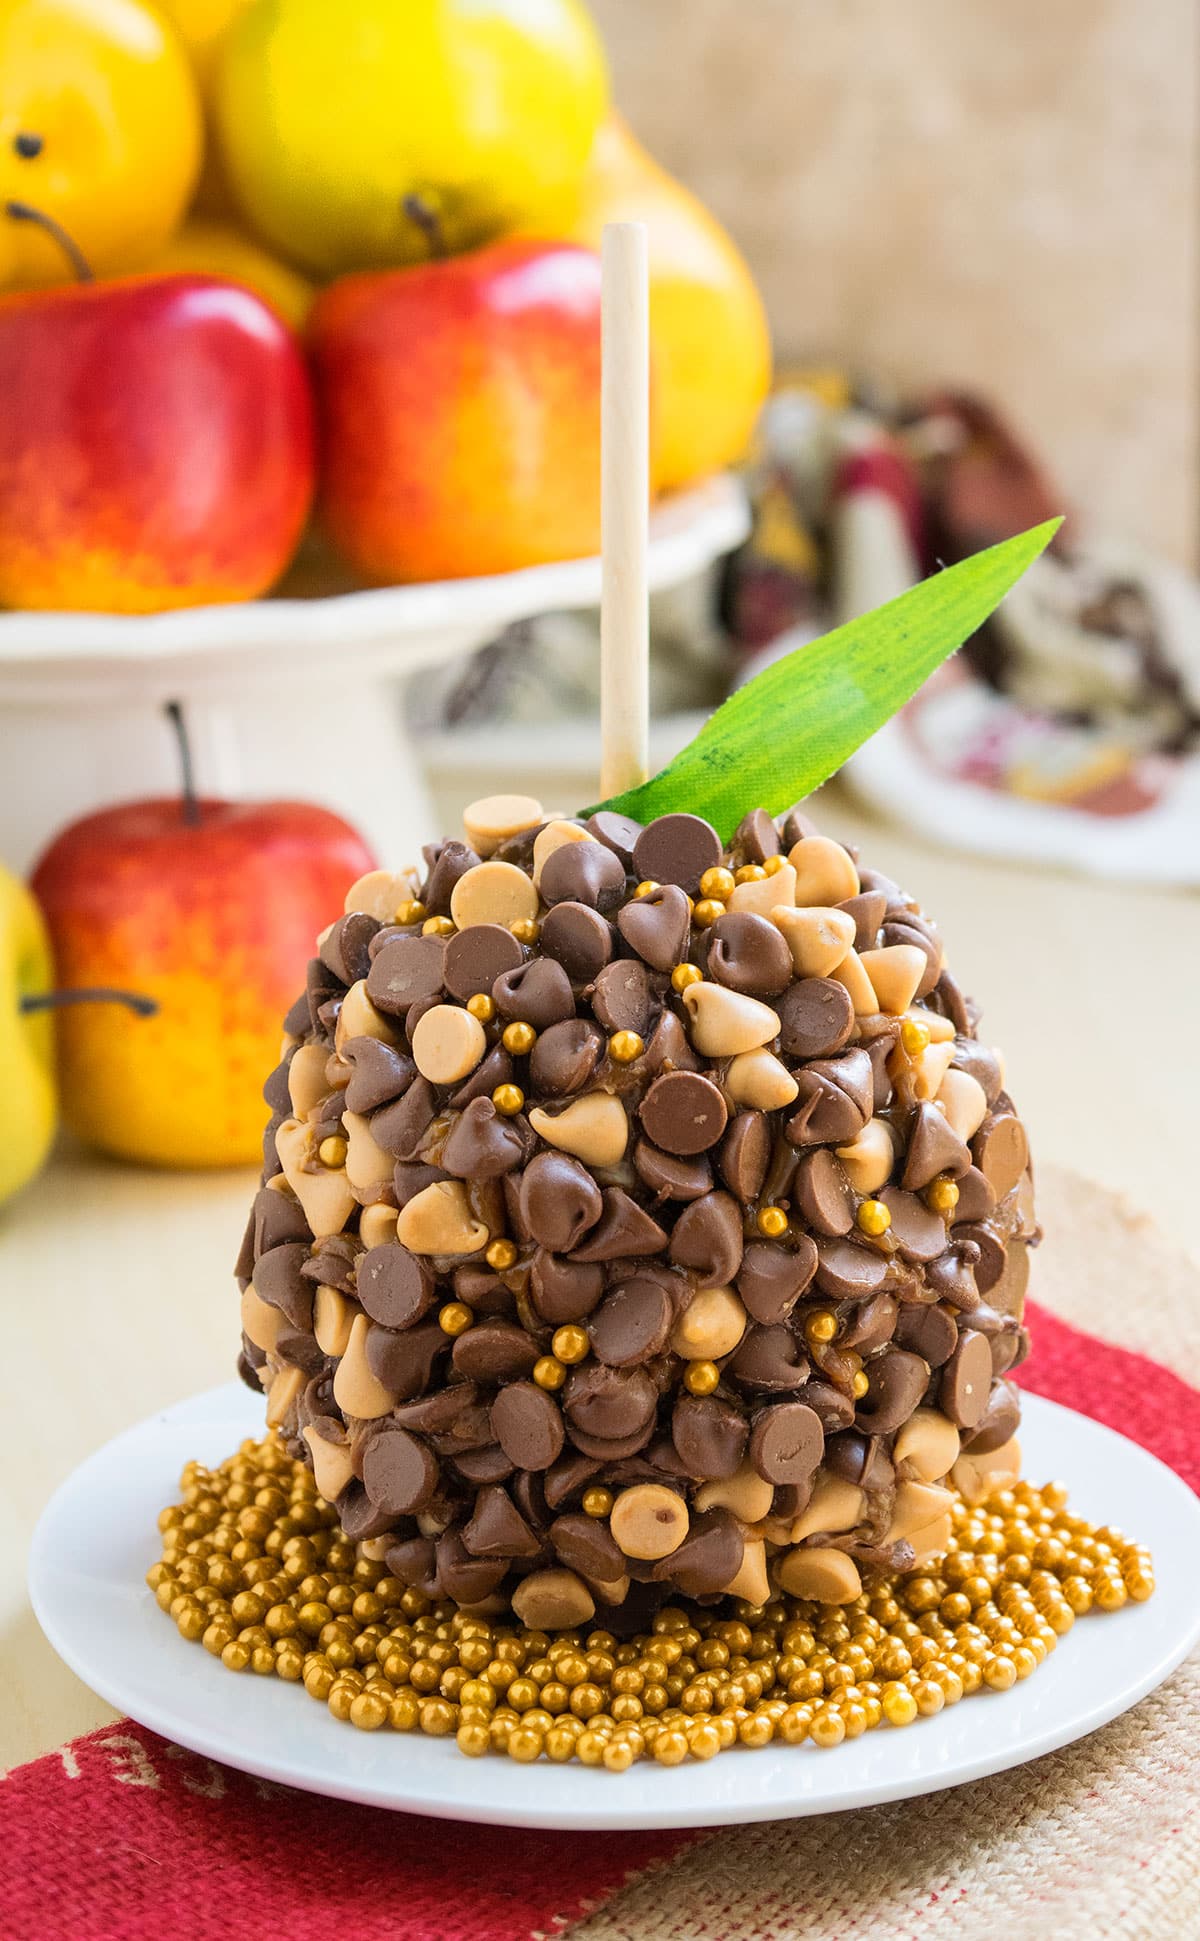 Dipped Caramel Apples on White Dish.